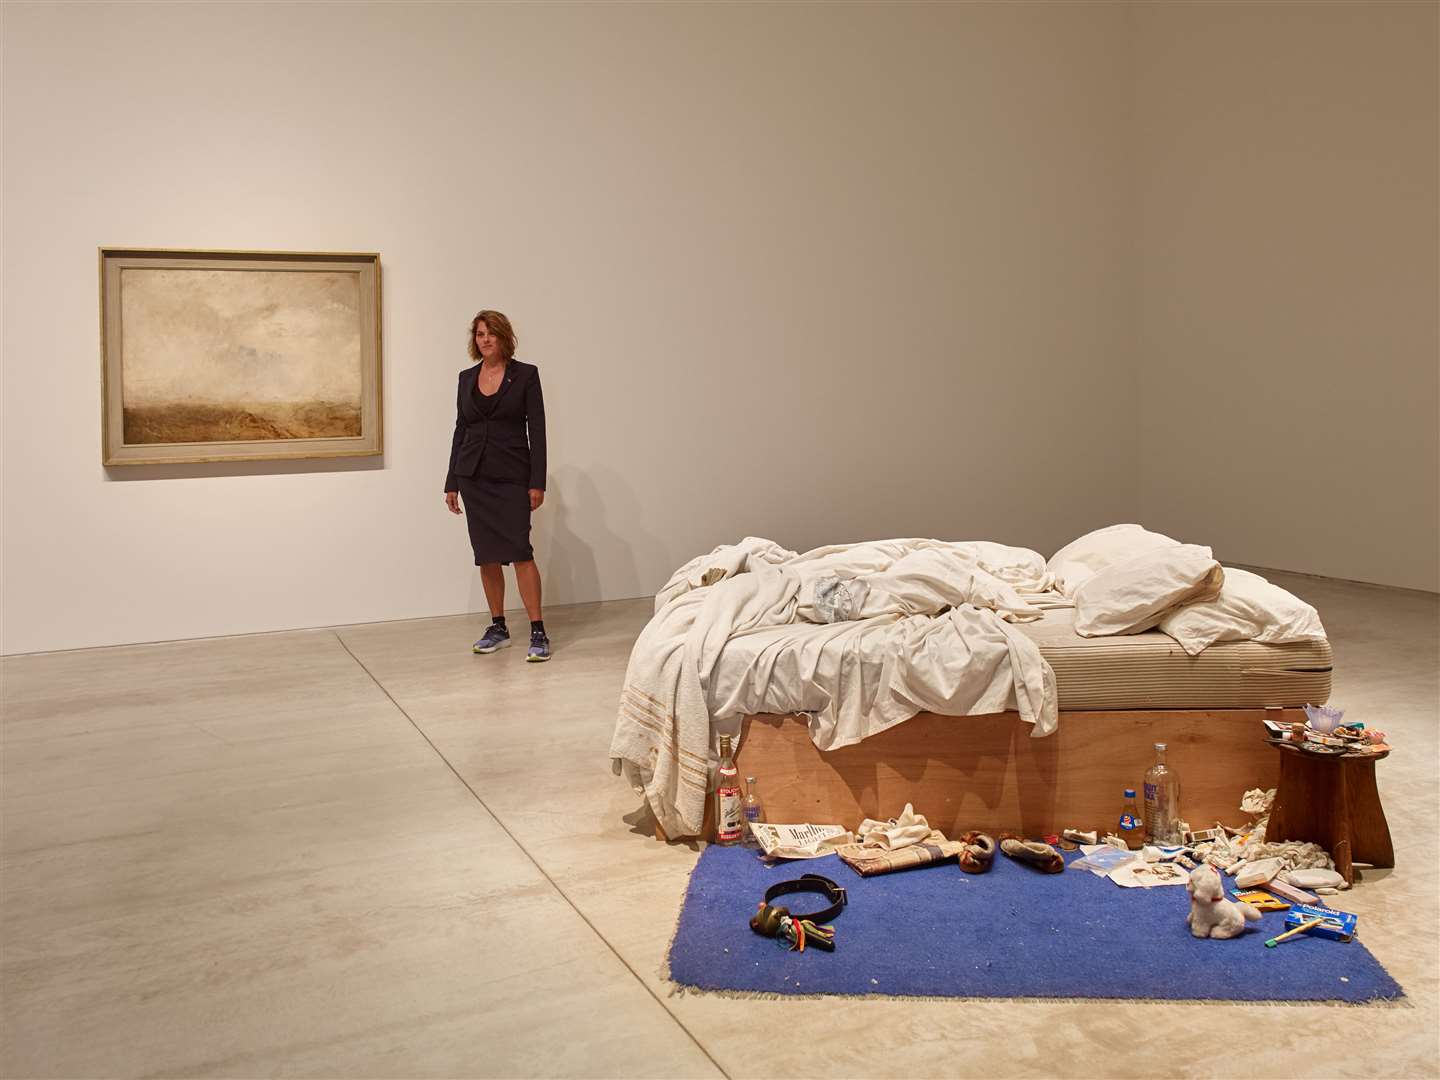 Tracey Emin and her famous My Bed which was nominated in 1999 and later sold for £2.2m